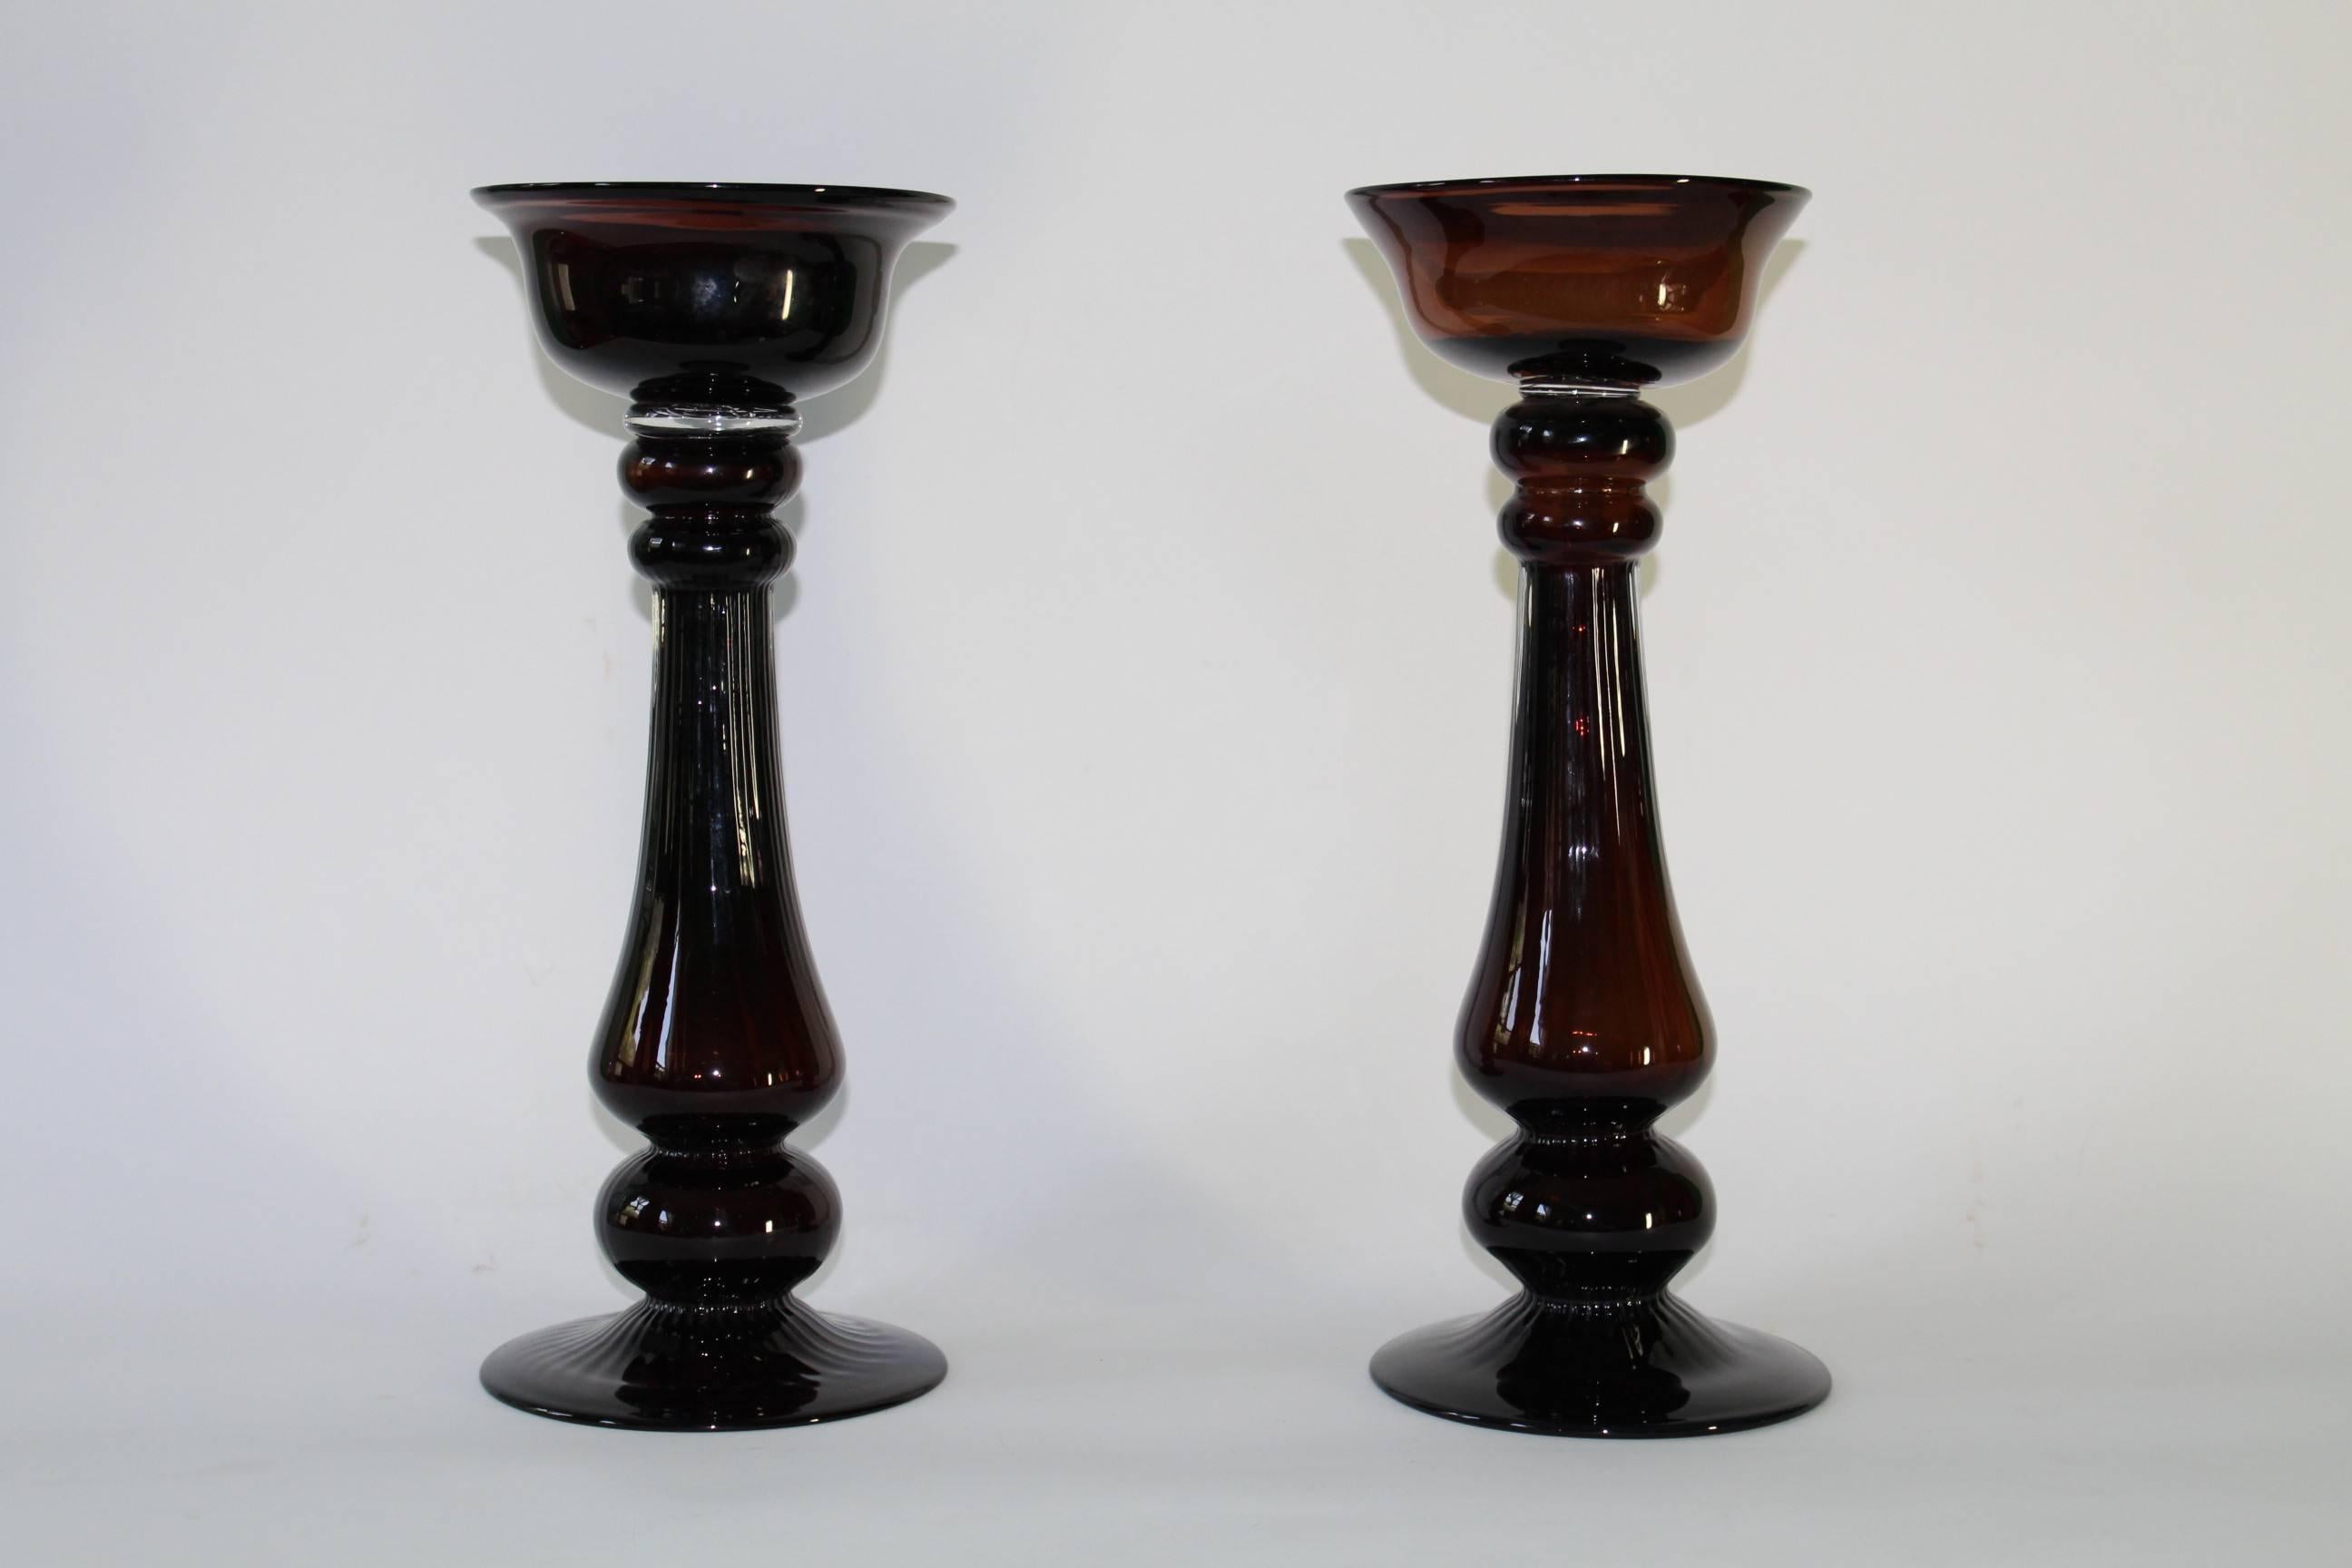 Pair of Mid-Century Modern, circa 1950s-1960s candlesticks, baluster form in hand blown brown colored glass. Each may accommodate a single candle 4